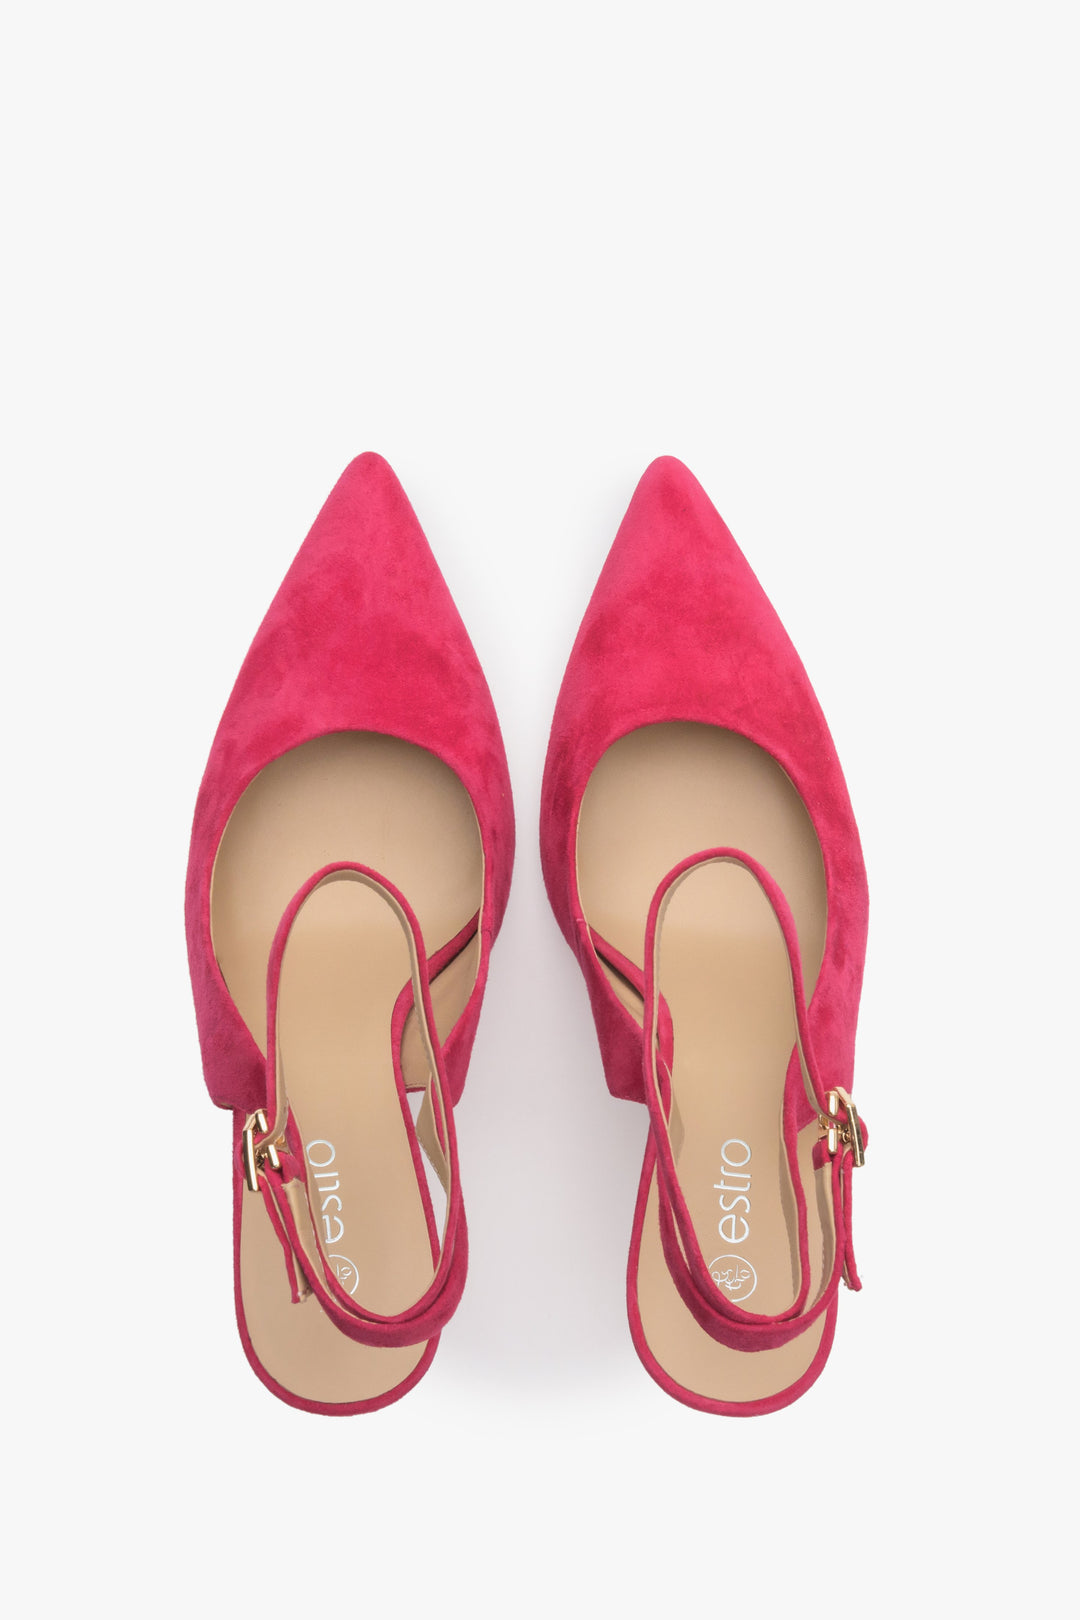 Women's pink slingback pumps with a funnel heel by Estro - presentation of the shoe from above.